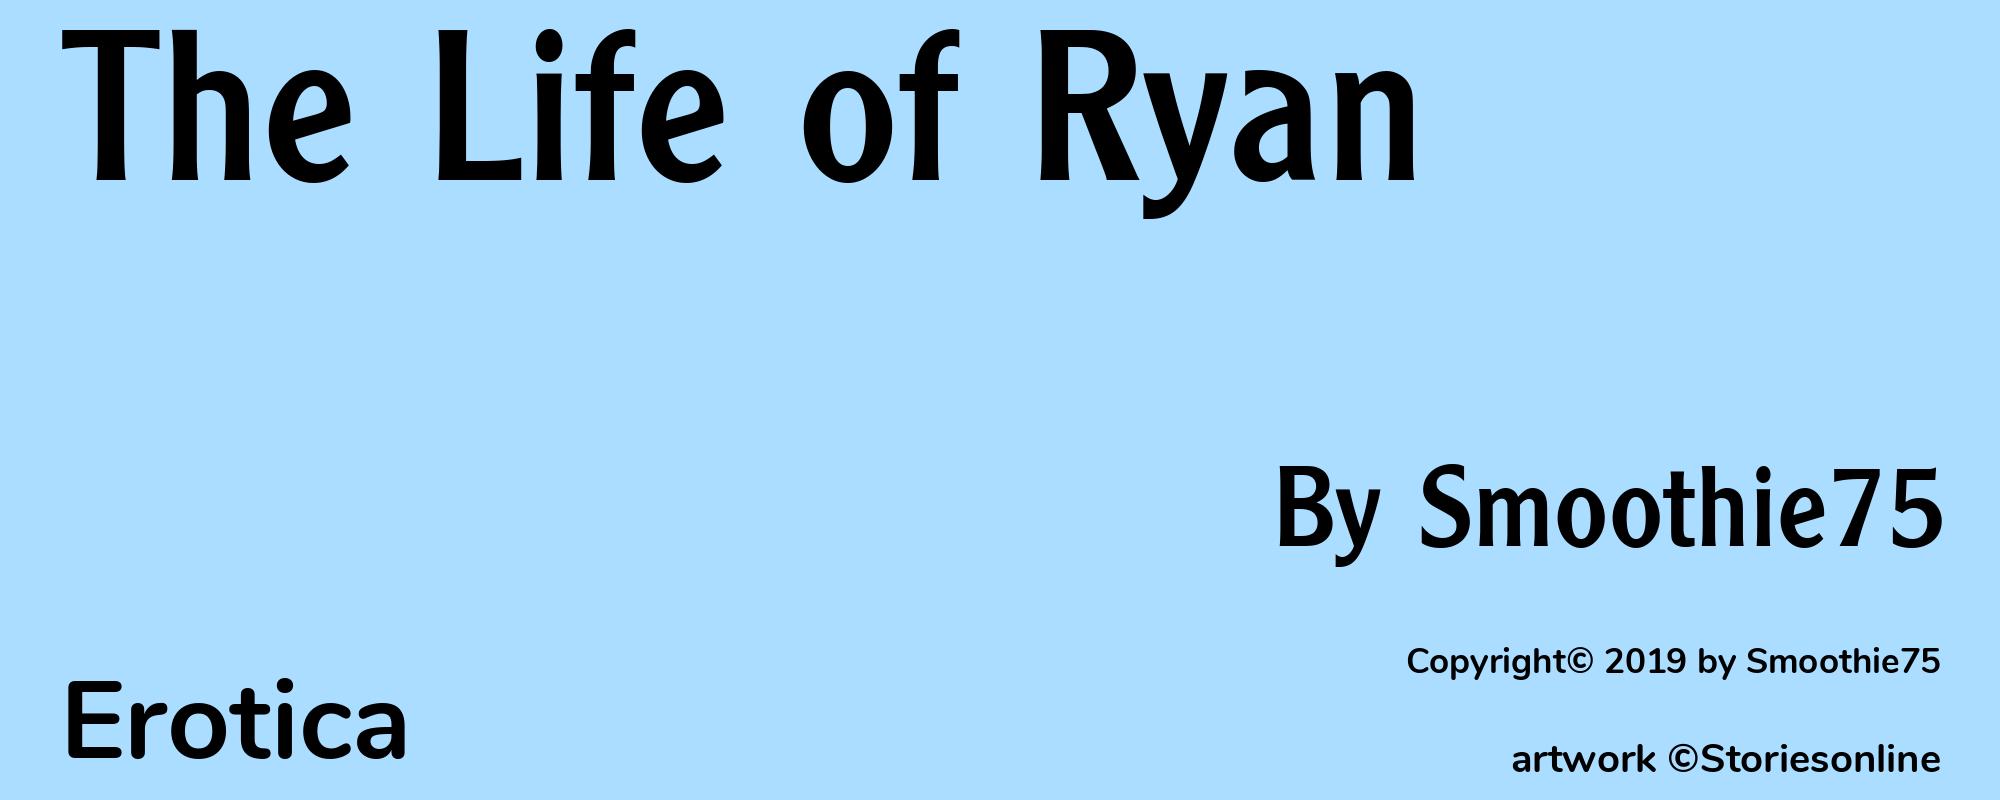 The Life of Ryan - Cover